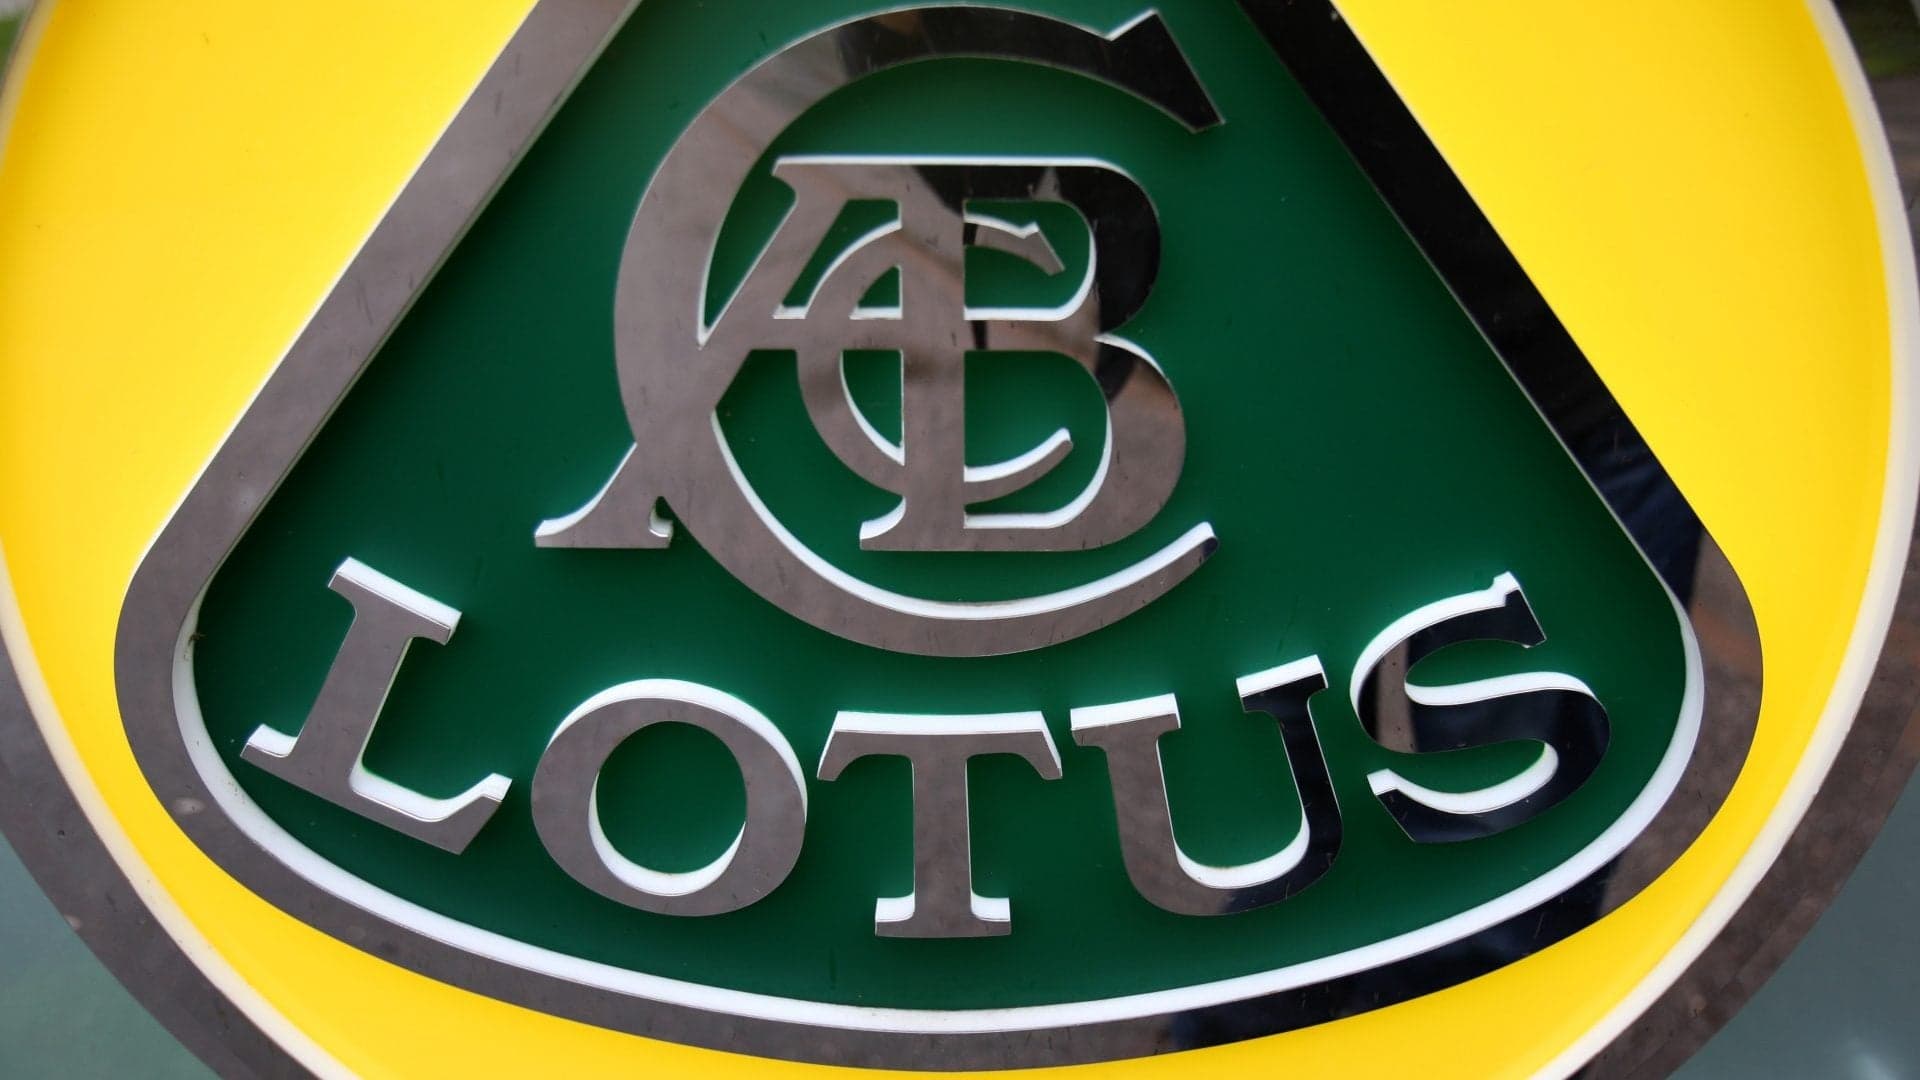 Lotus Developing $2.6 Million Electric Hypercar, Concept Coming in 2019: Report